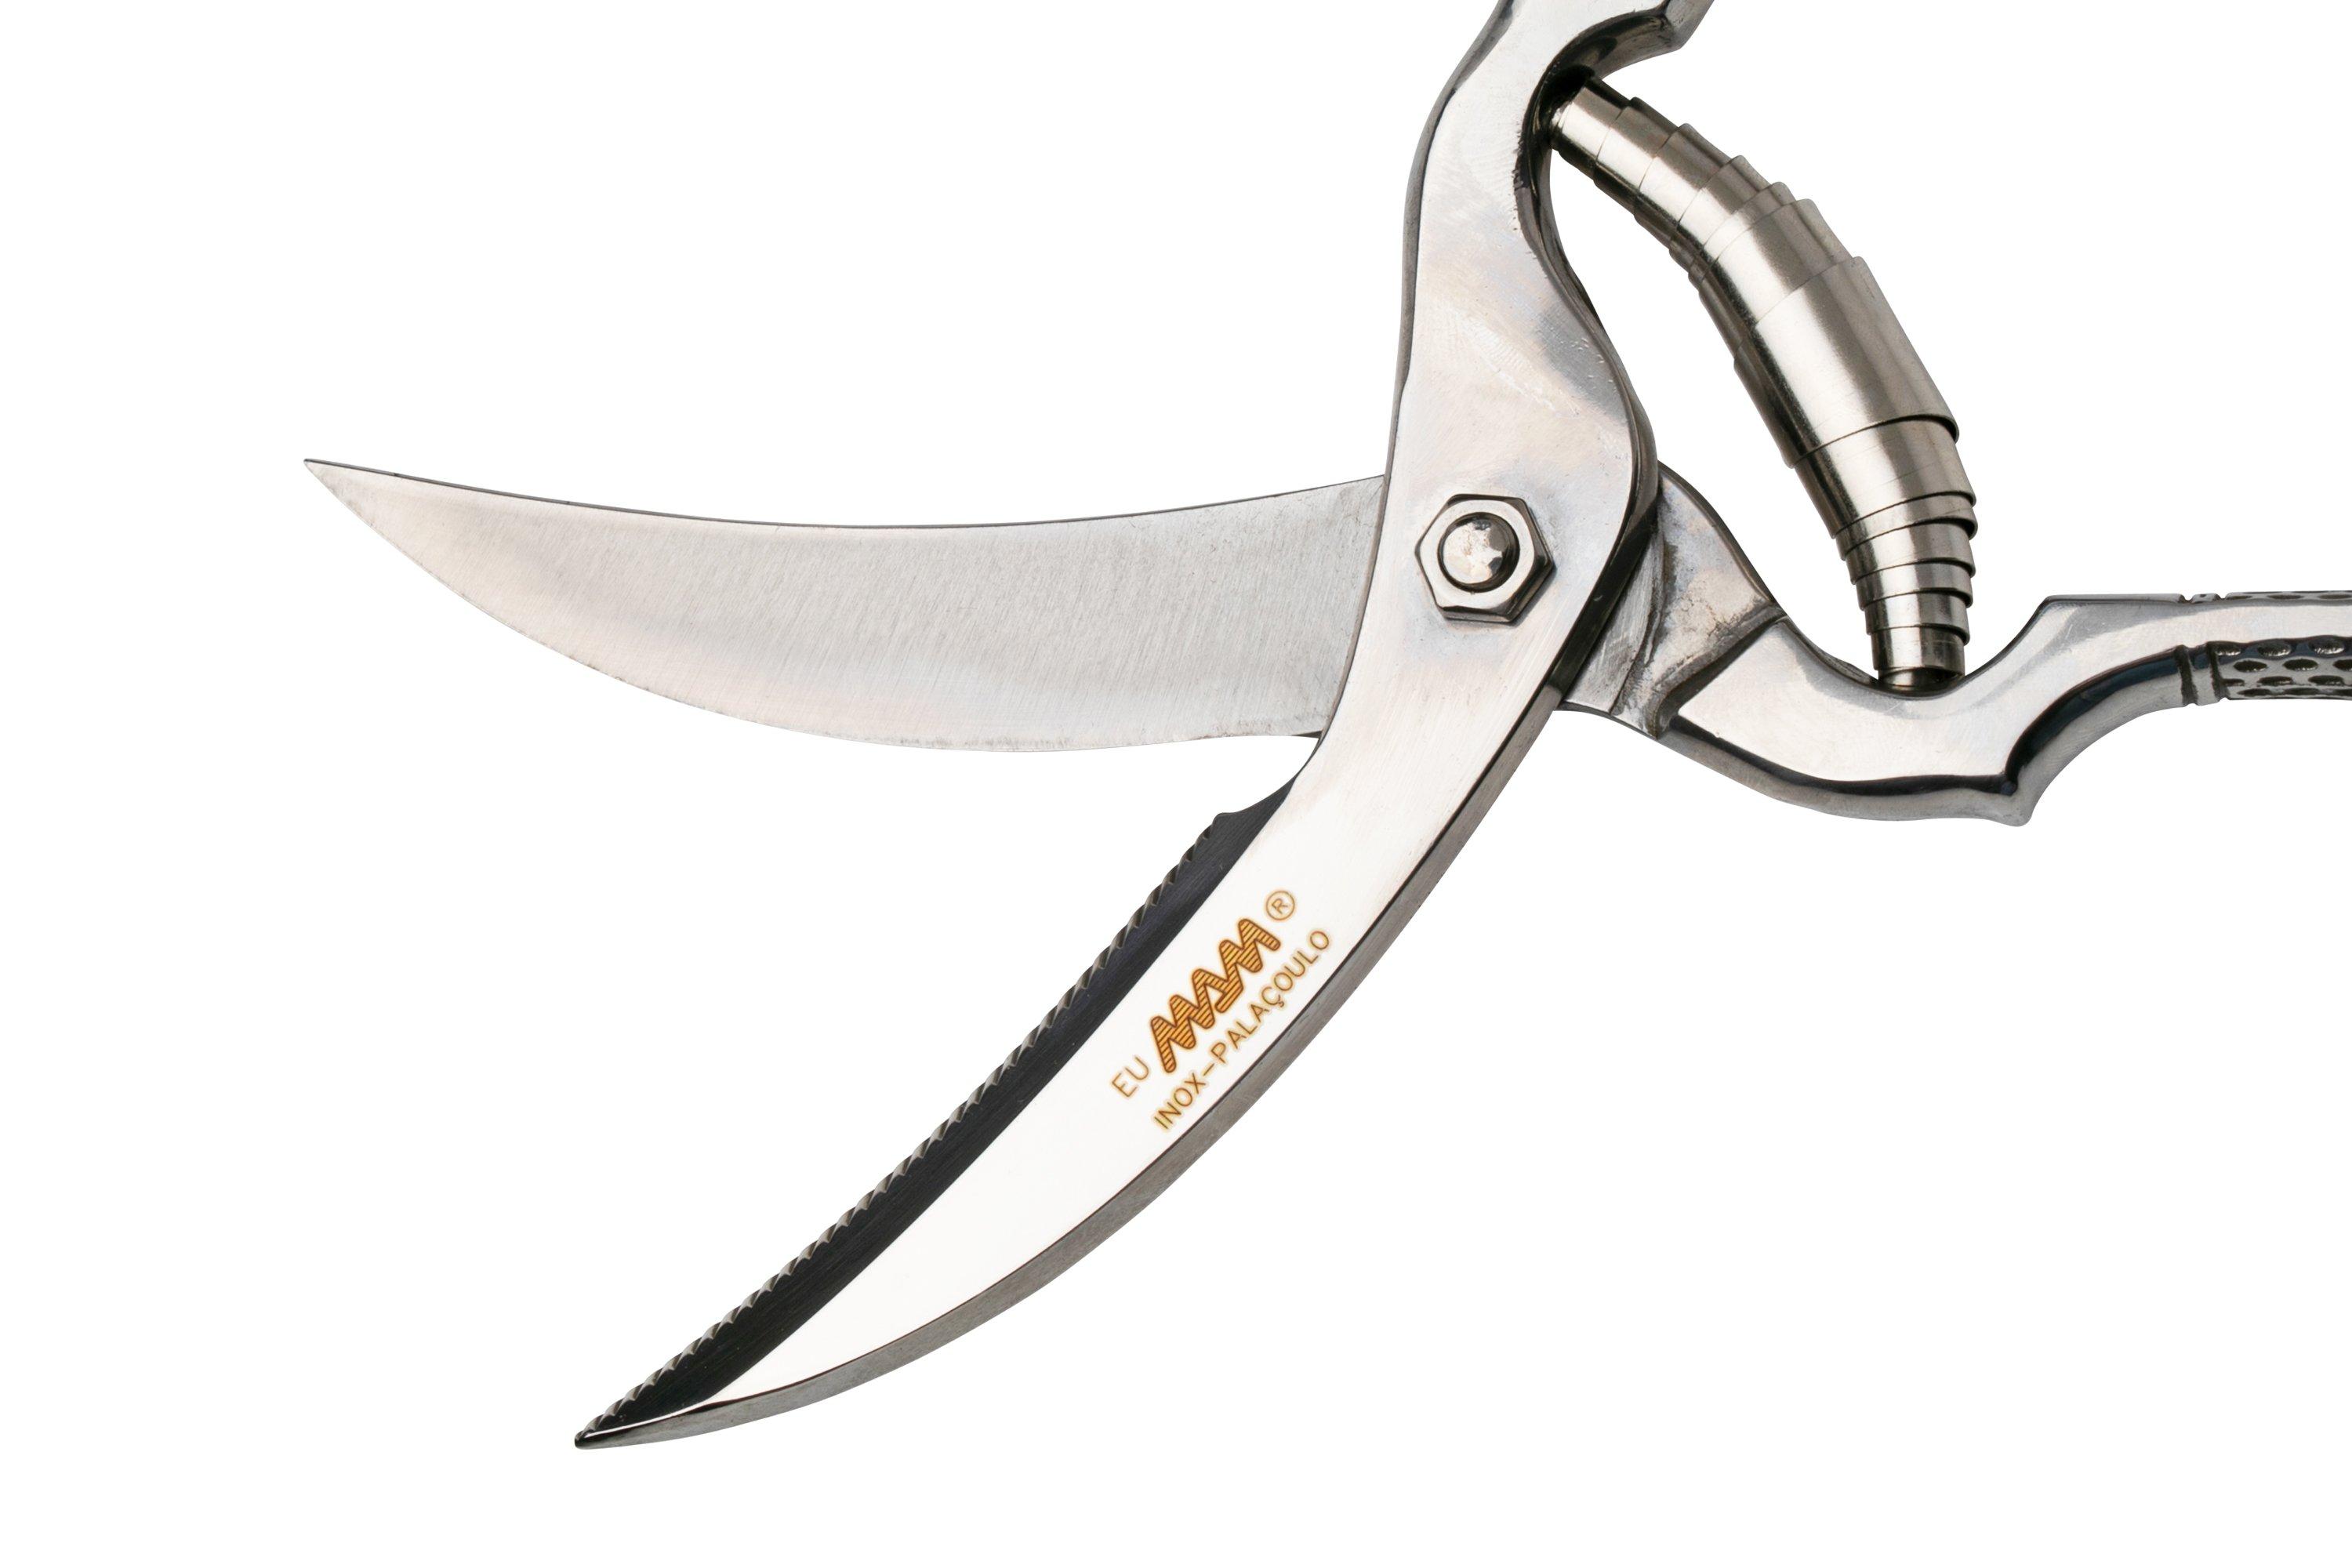 MAM Poultry Carving Shears 15047, poultry shears